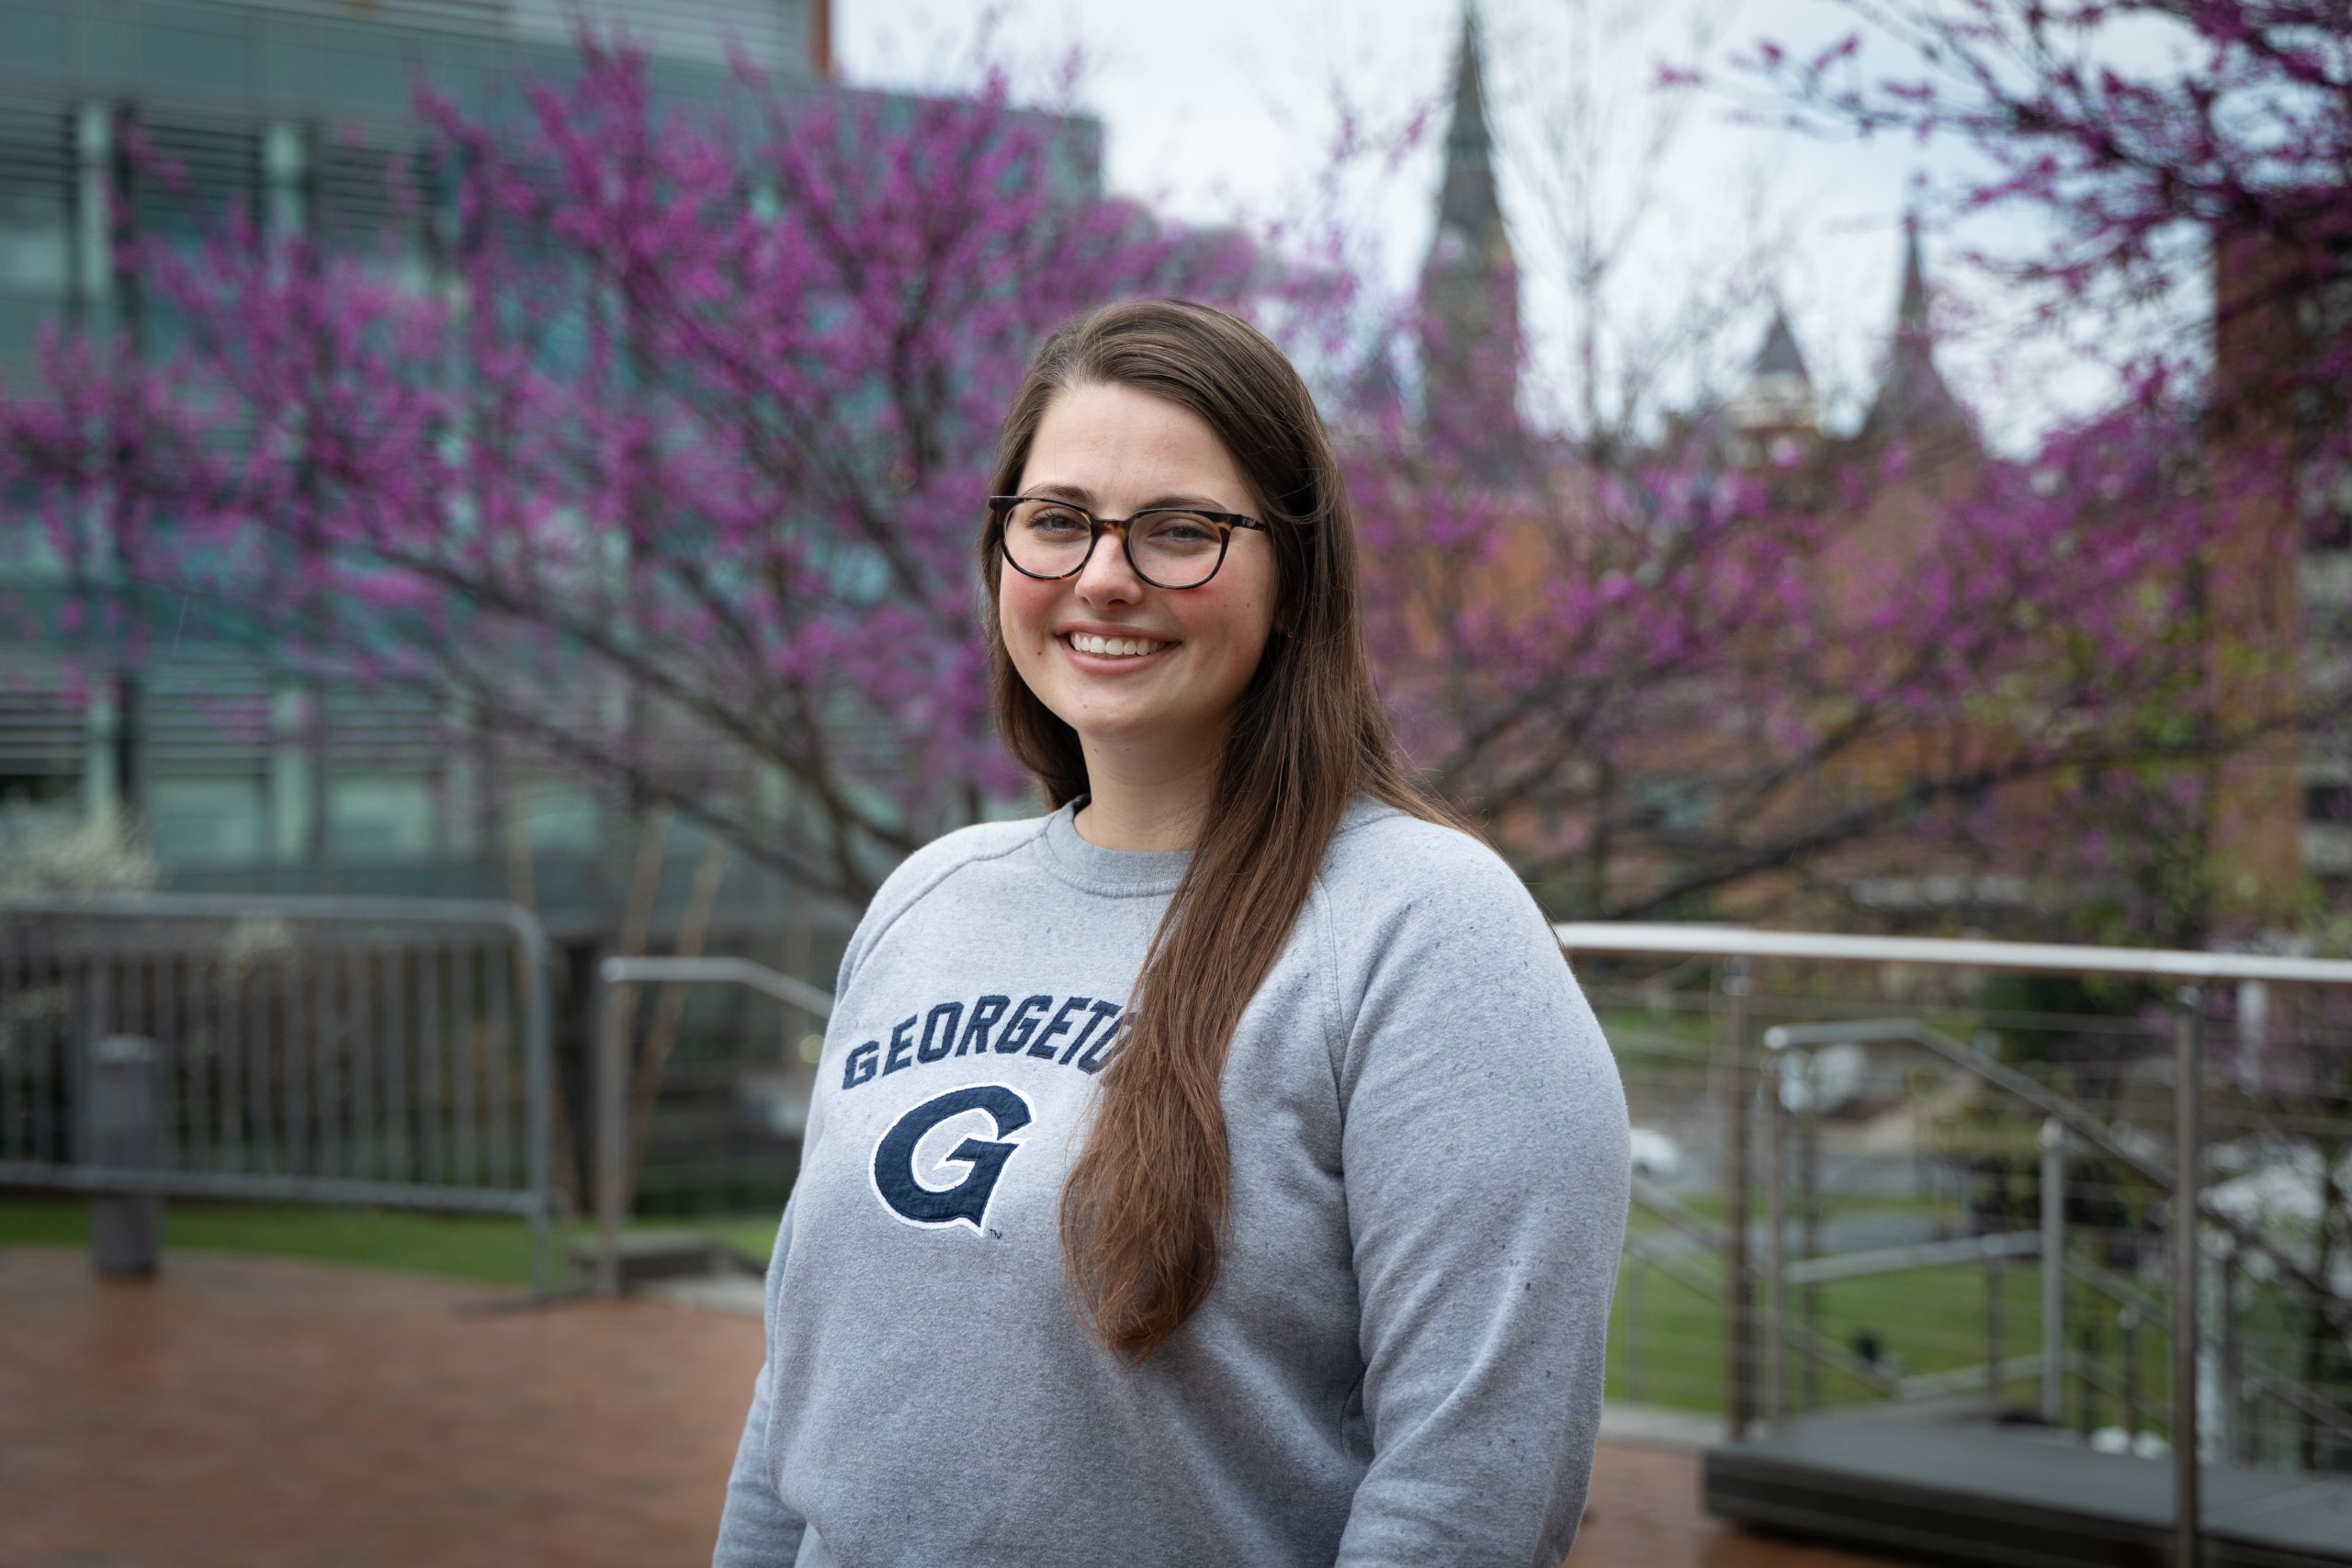 Kiki wears a gray Georgetown sweatshirt while outside in front of a blooming tree with Healy Hall in the background